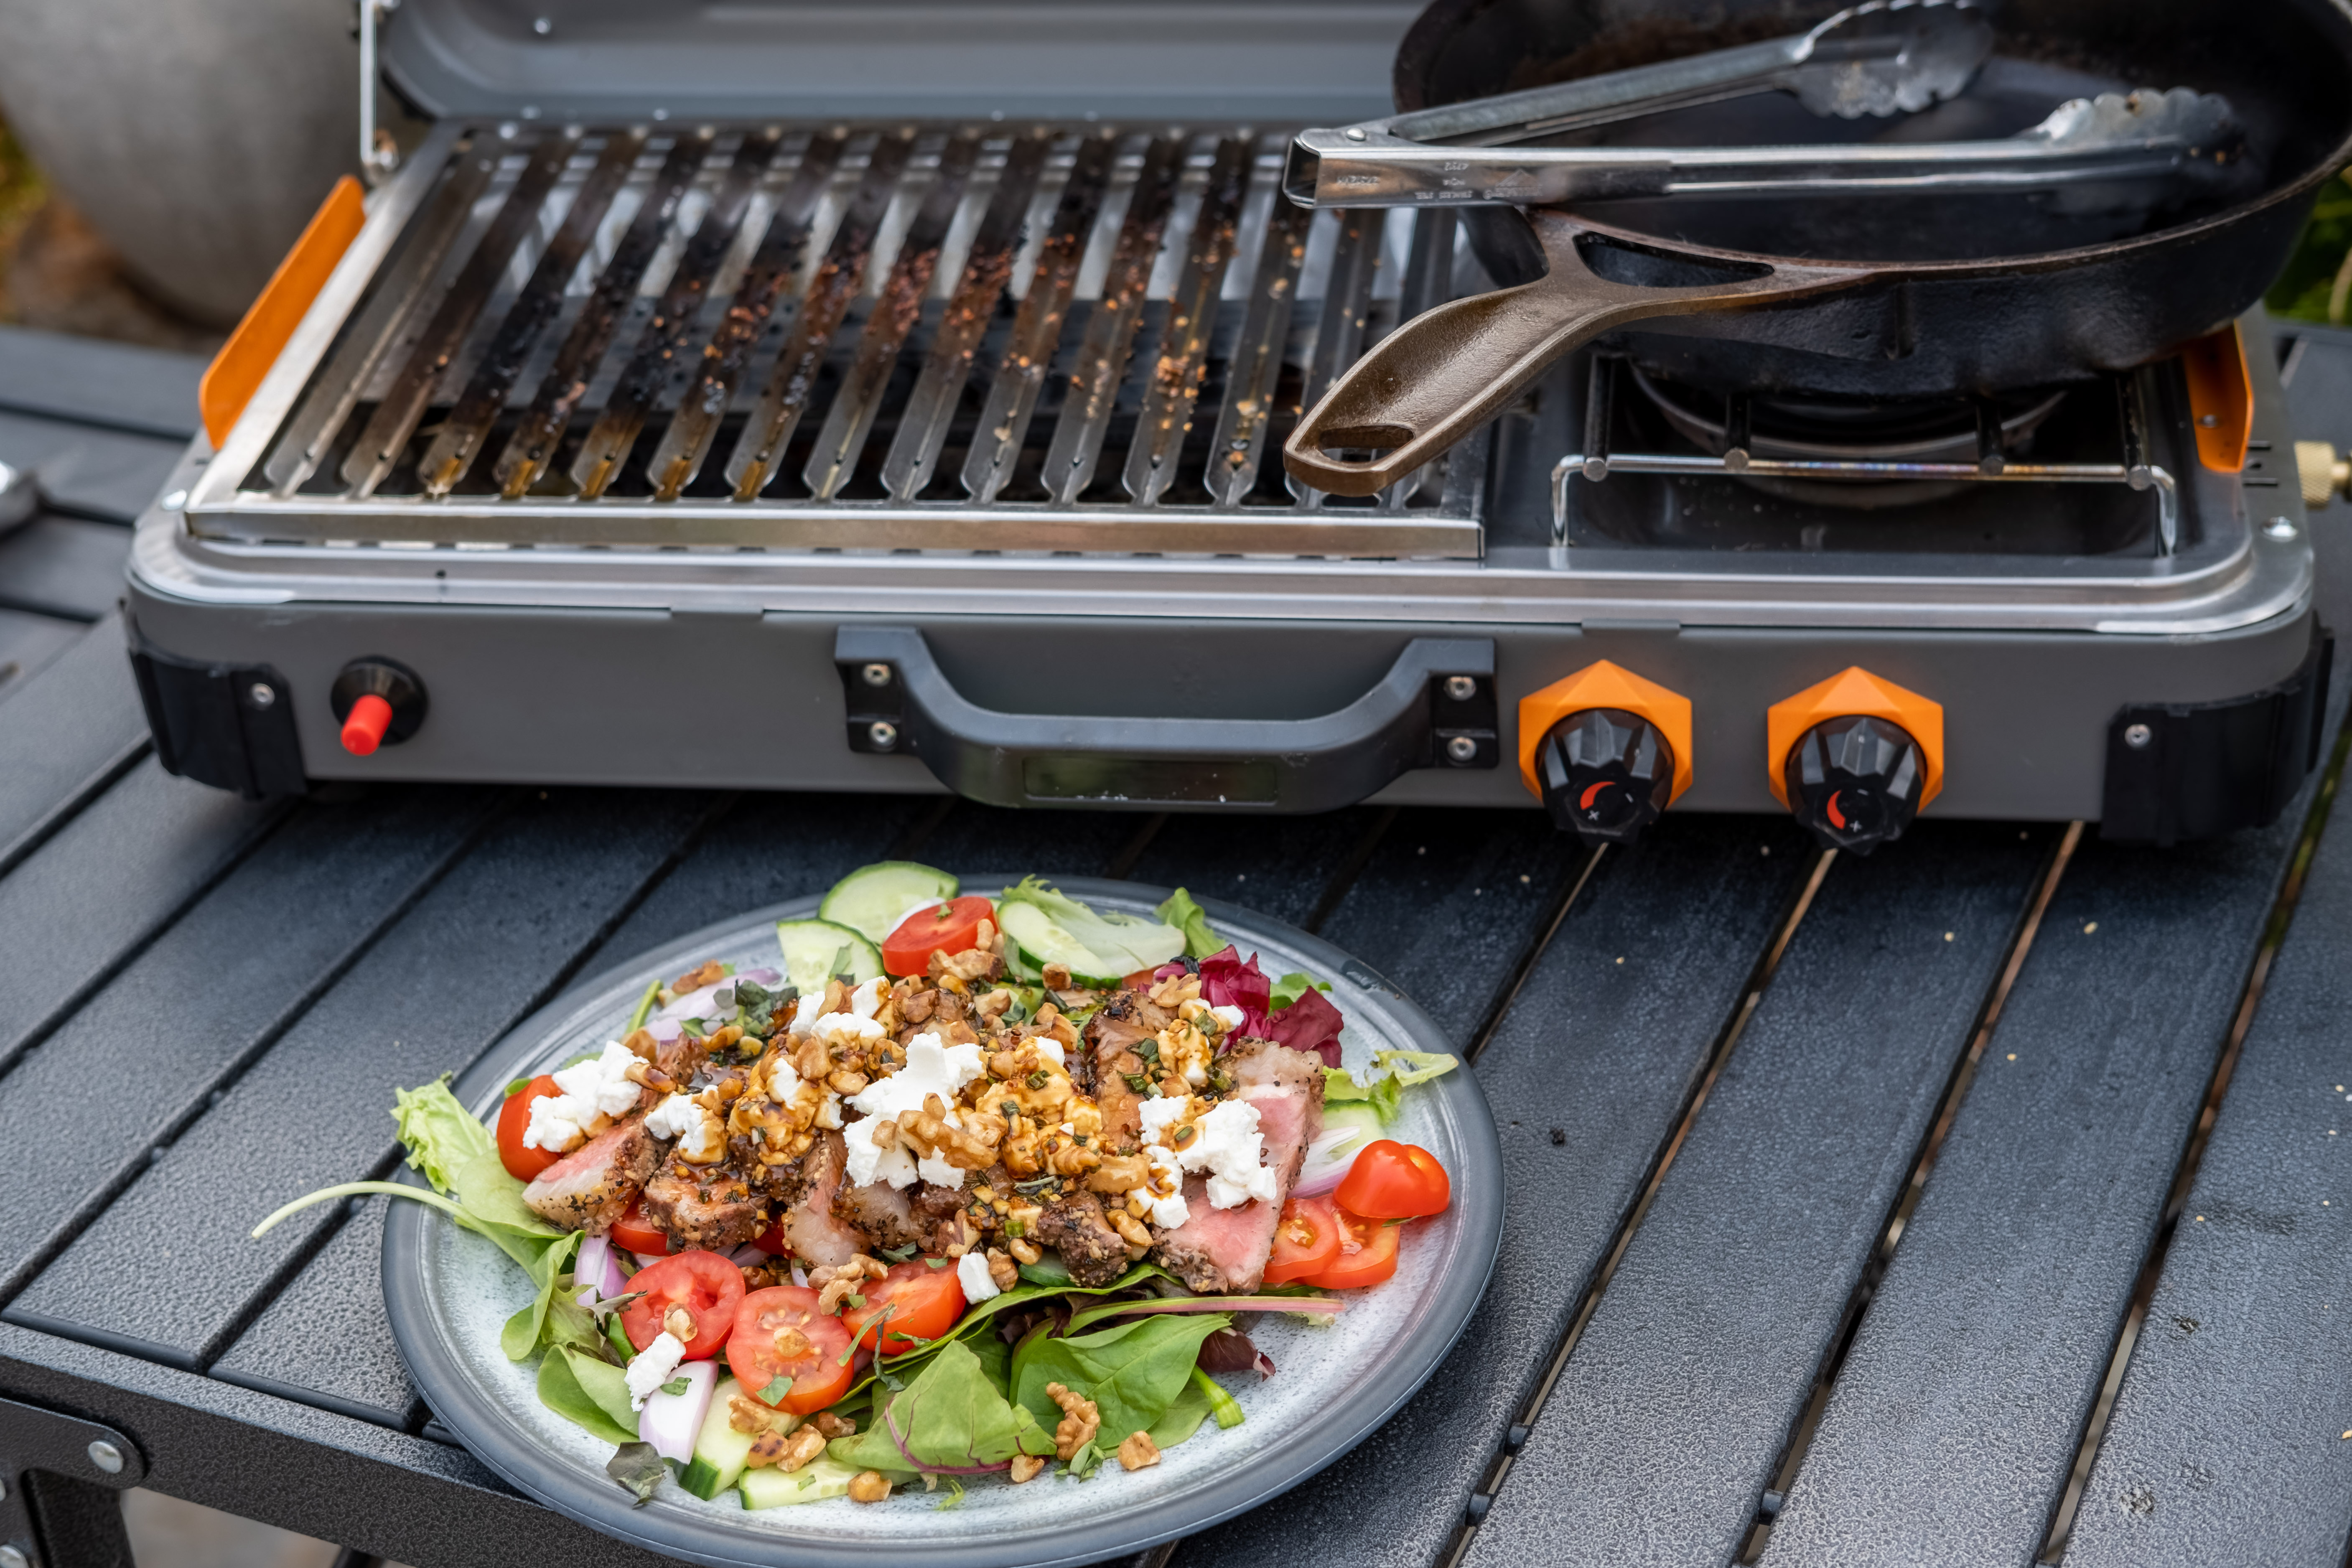 Steak Salad in front of a Kuma Outdoor Gear Grill & Propane Stove that was used to cook the steak and toast the walnuts